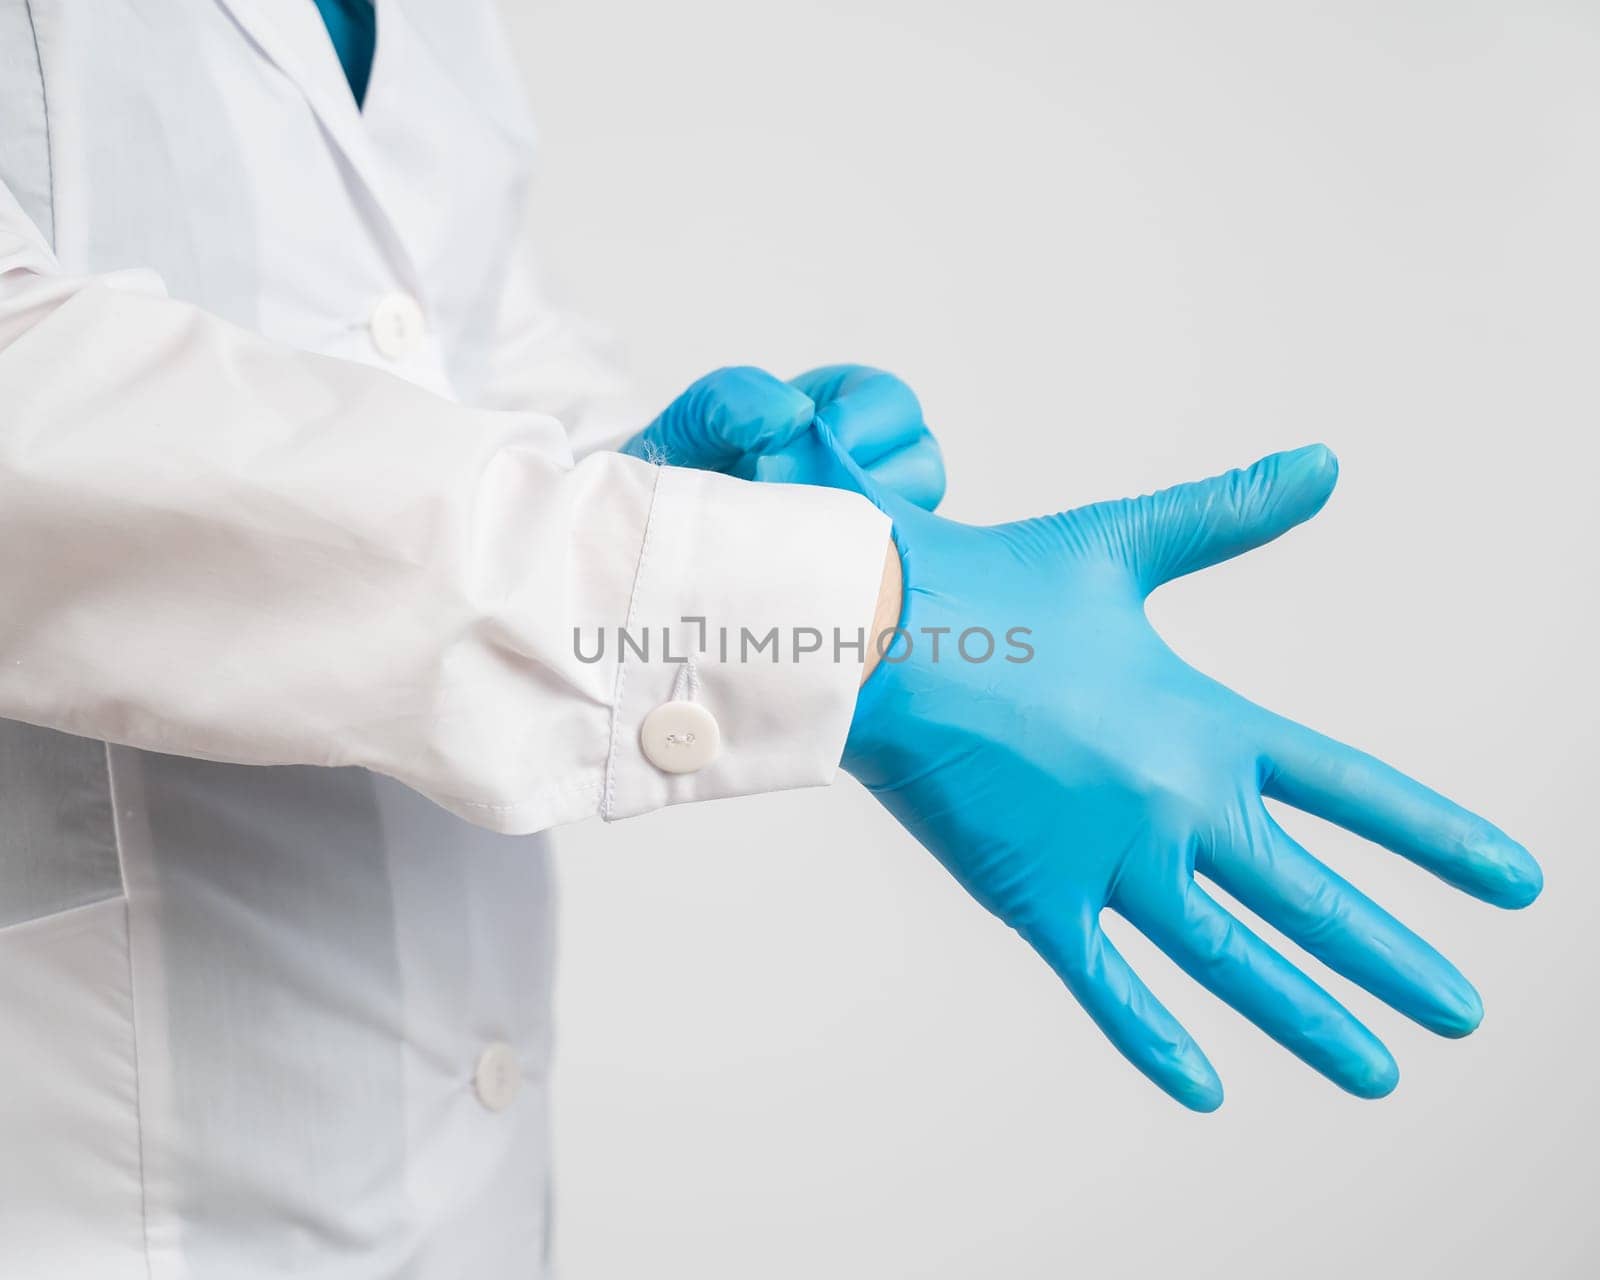 The doctor puts on latex gloves on a white background. by mrwed54